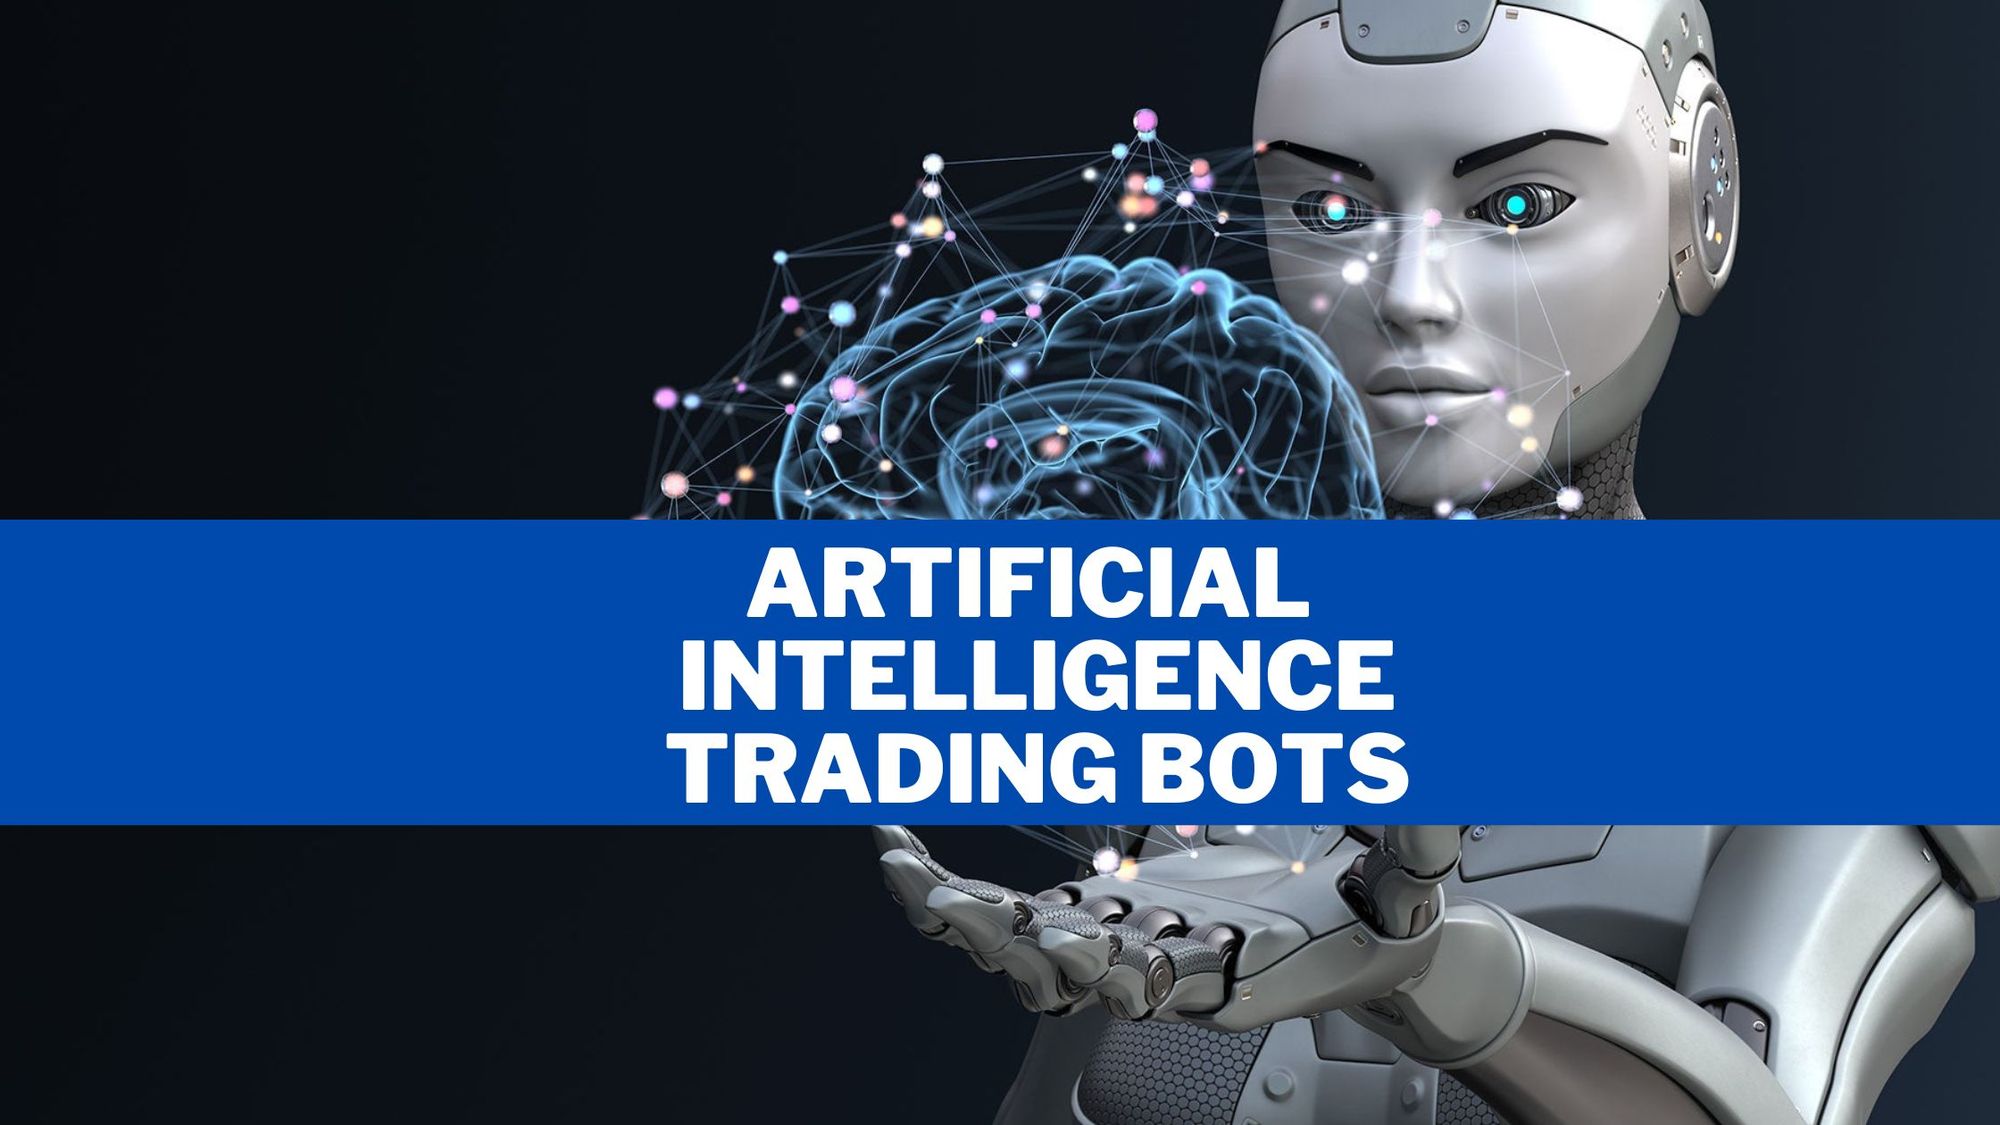 Battle of the Bots: Which AI is Better at Picking Stocks?